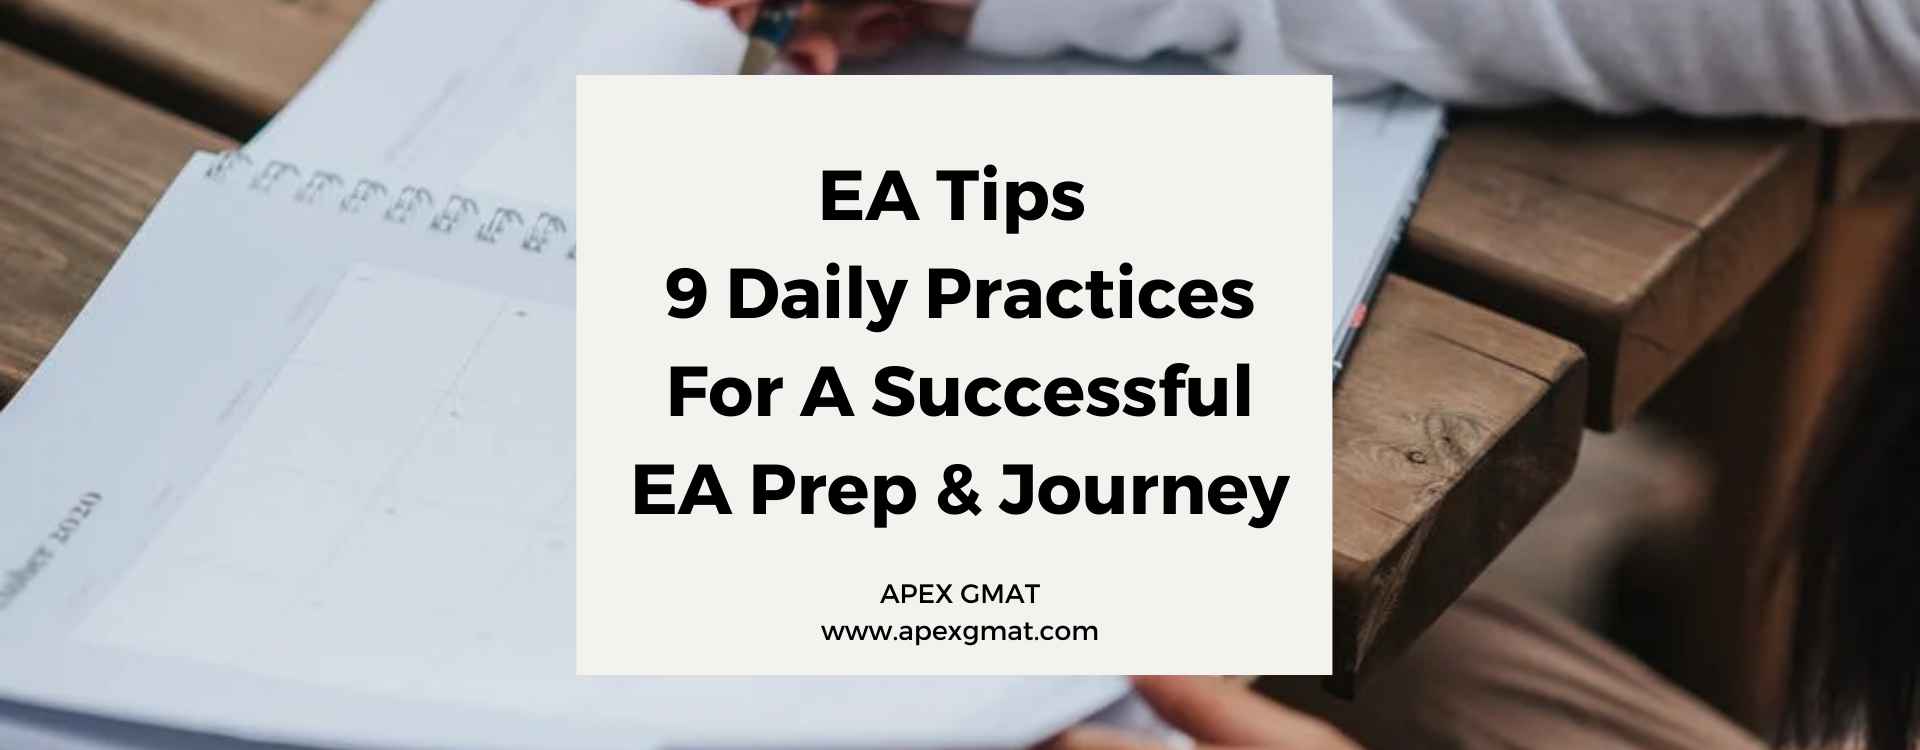 EA Tips – 9 Daily Practices for EA Prep Success